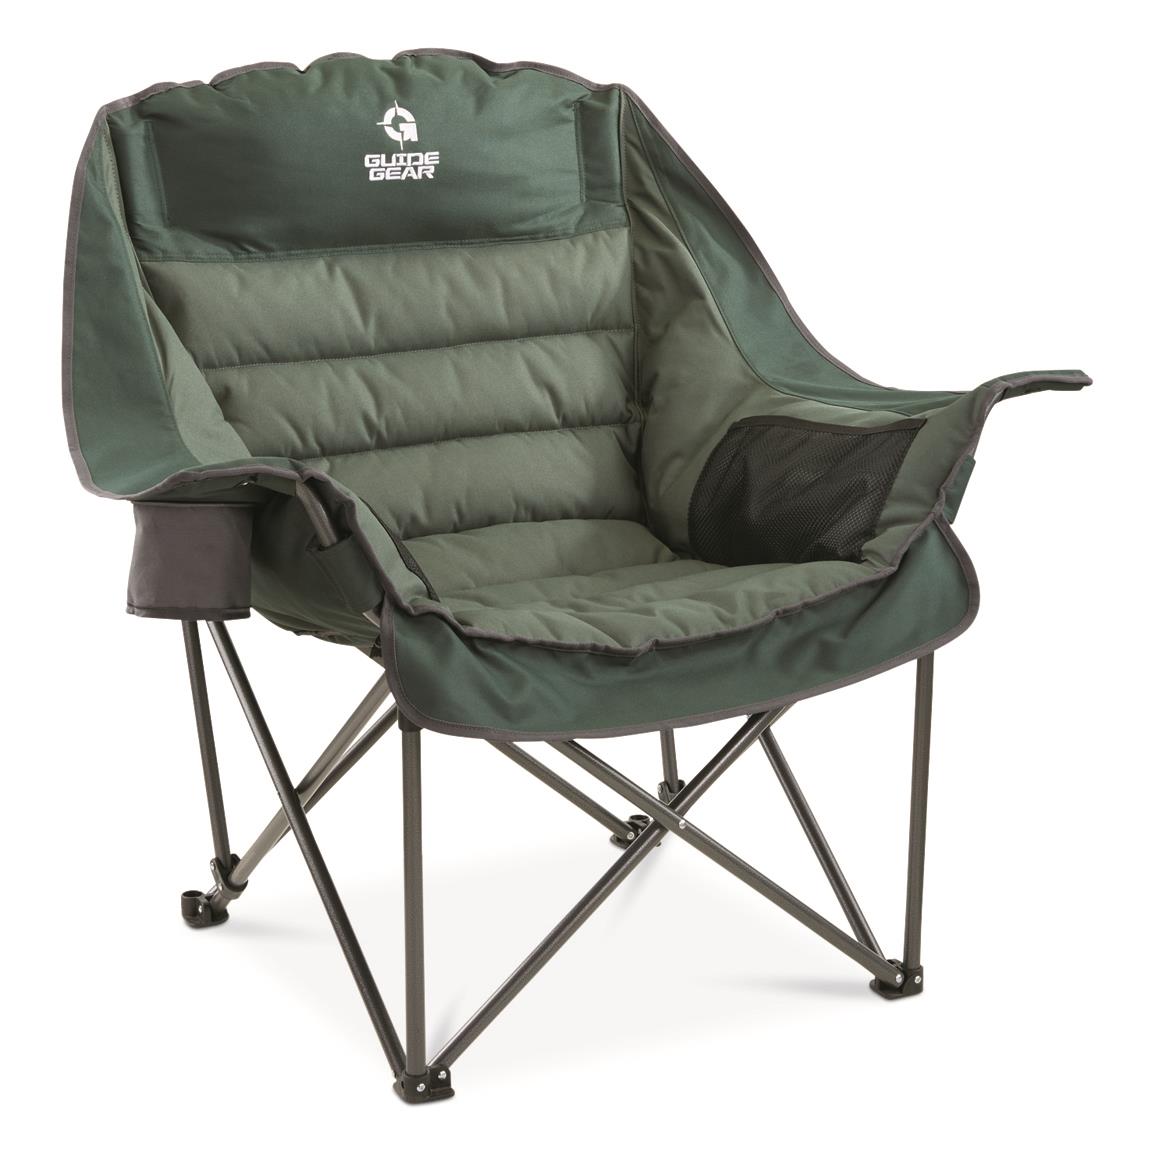 Guide Gear Oversized XL Comfort Padded Camping Chair, 400-lb